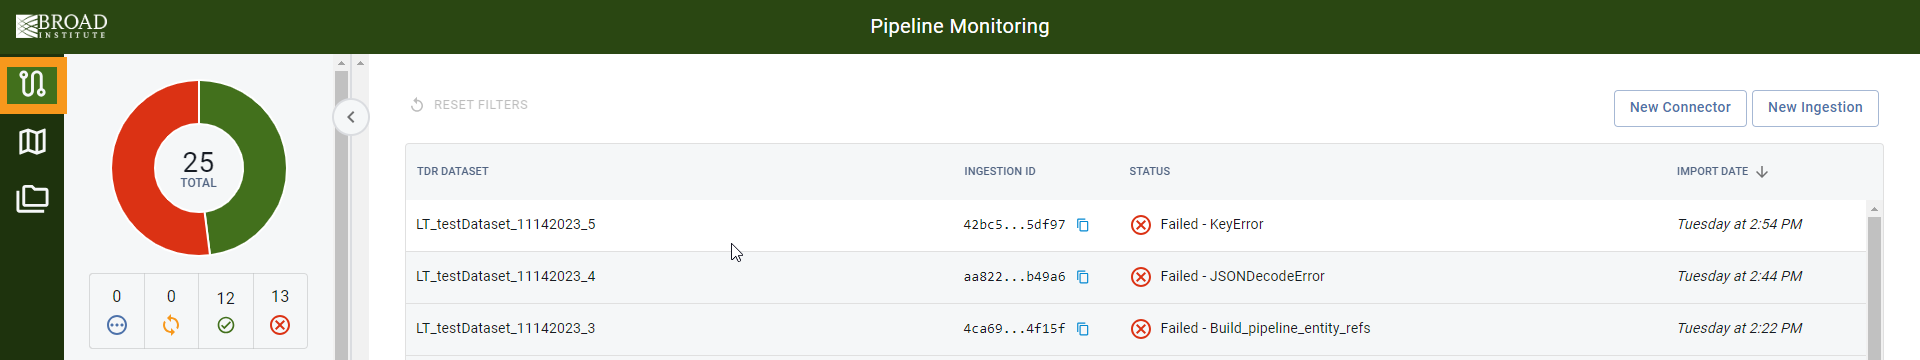 Screenshot showing the Pipeline Monitoring dashboard on the Zebrafish website. An orange rectangle highlights the piepeline monitoring icon on the upper left of the screen.